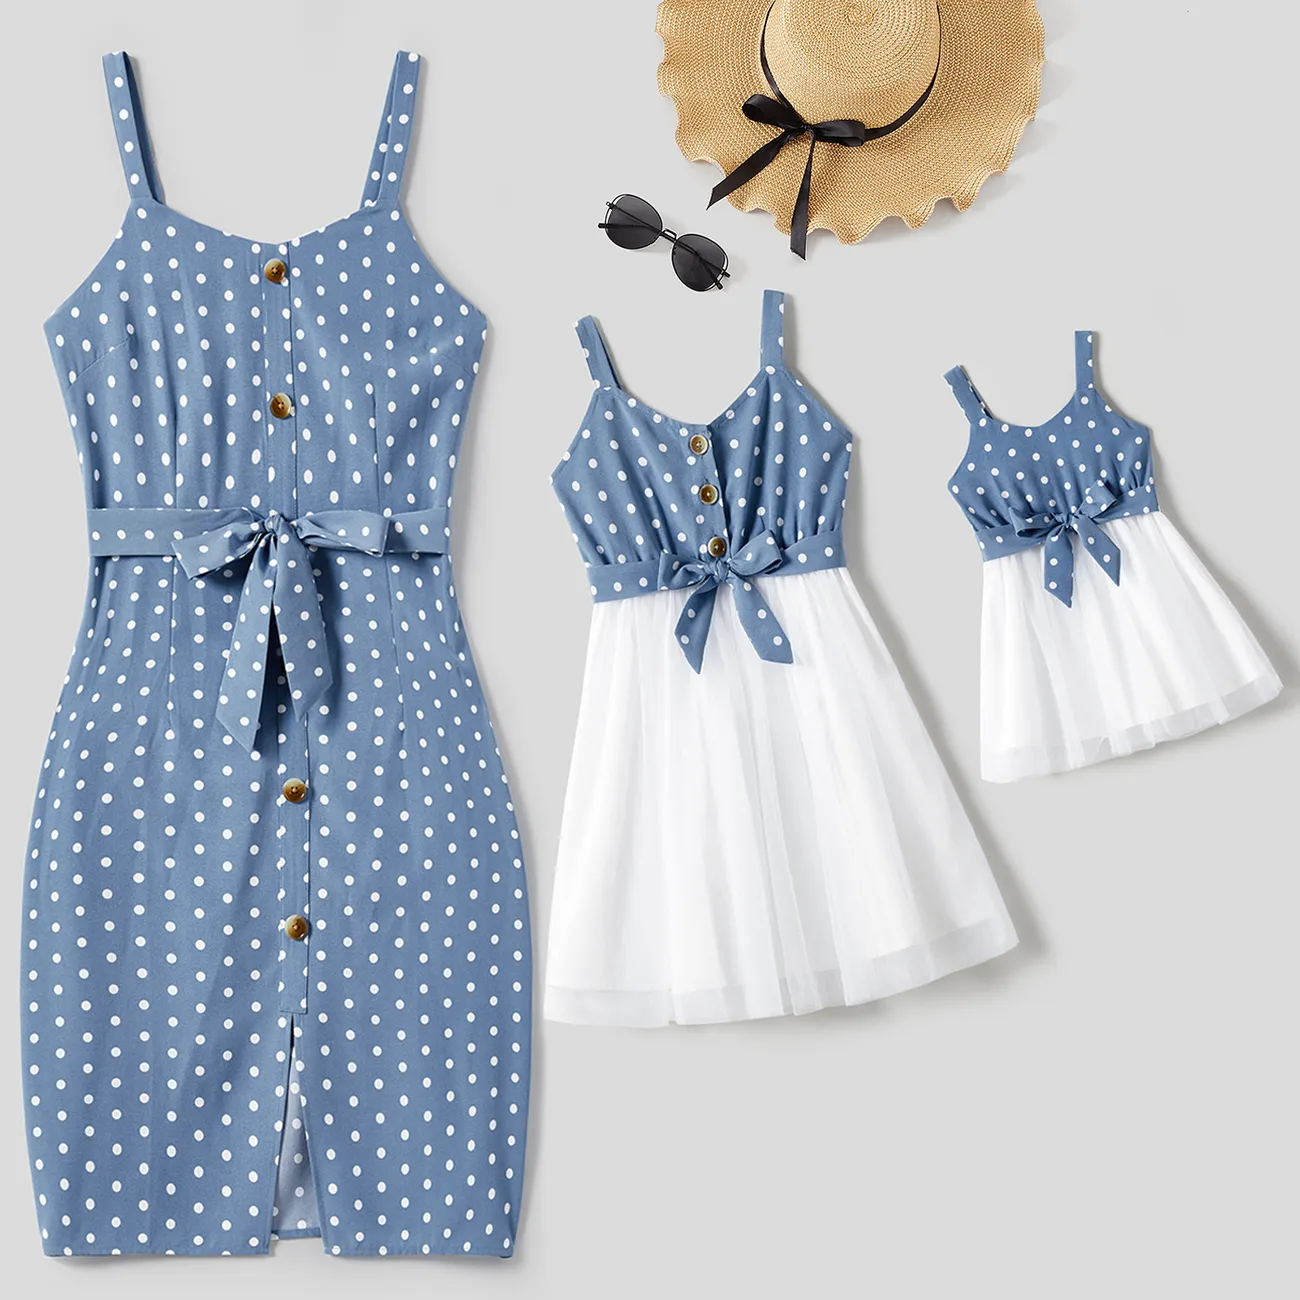 Mommy and Me Polka Dots Print Belted Cami Dresses Blue big image 1